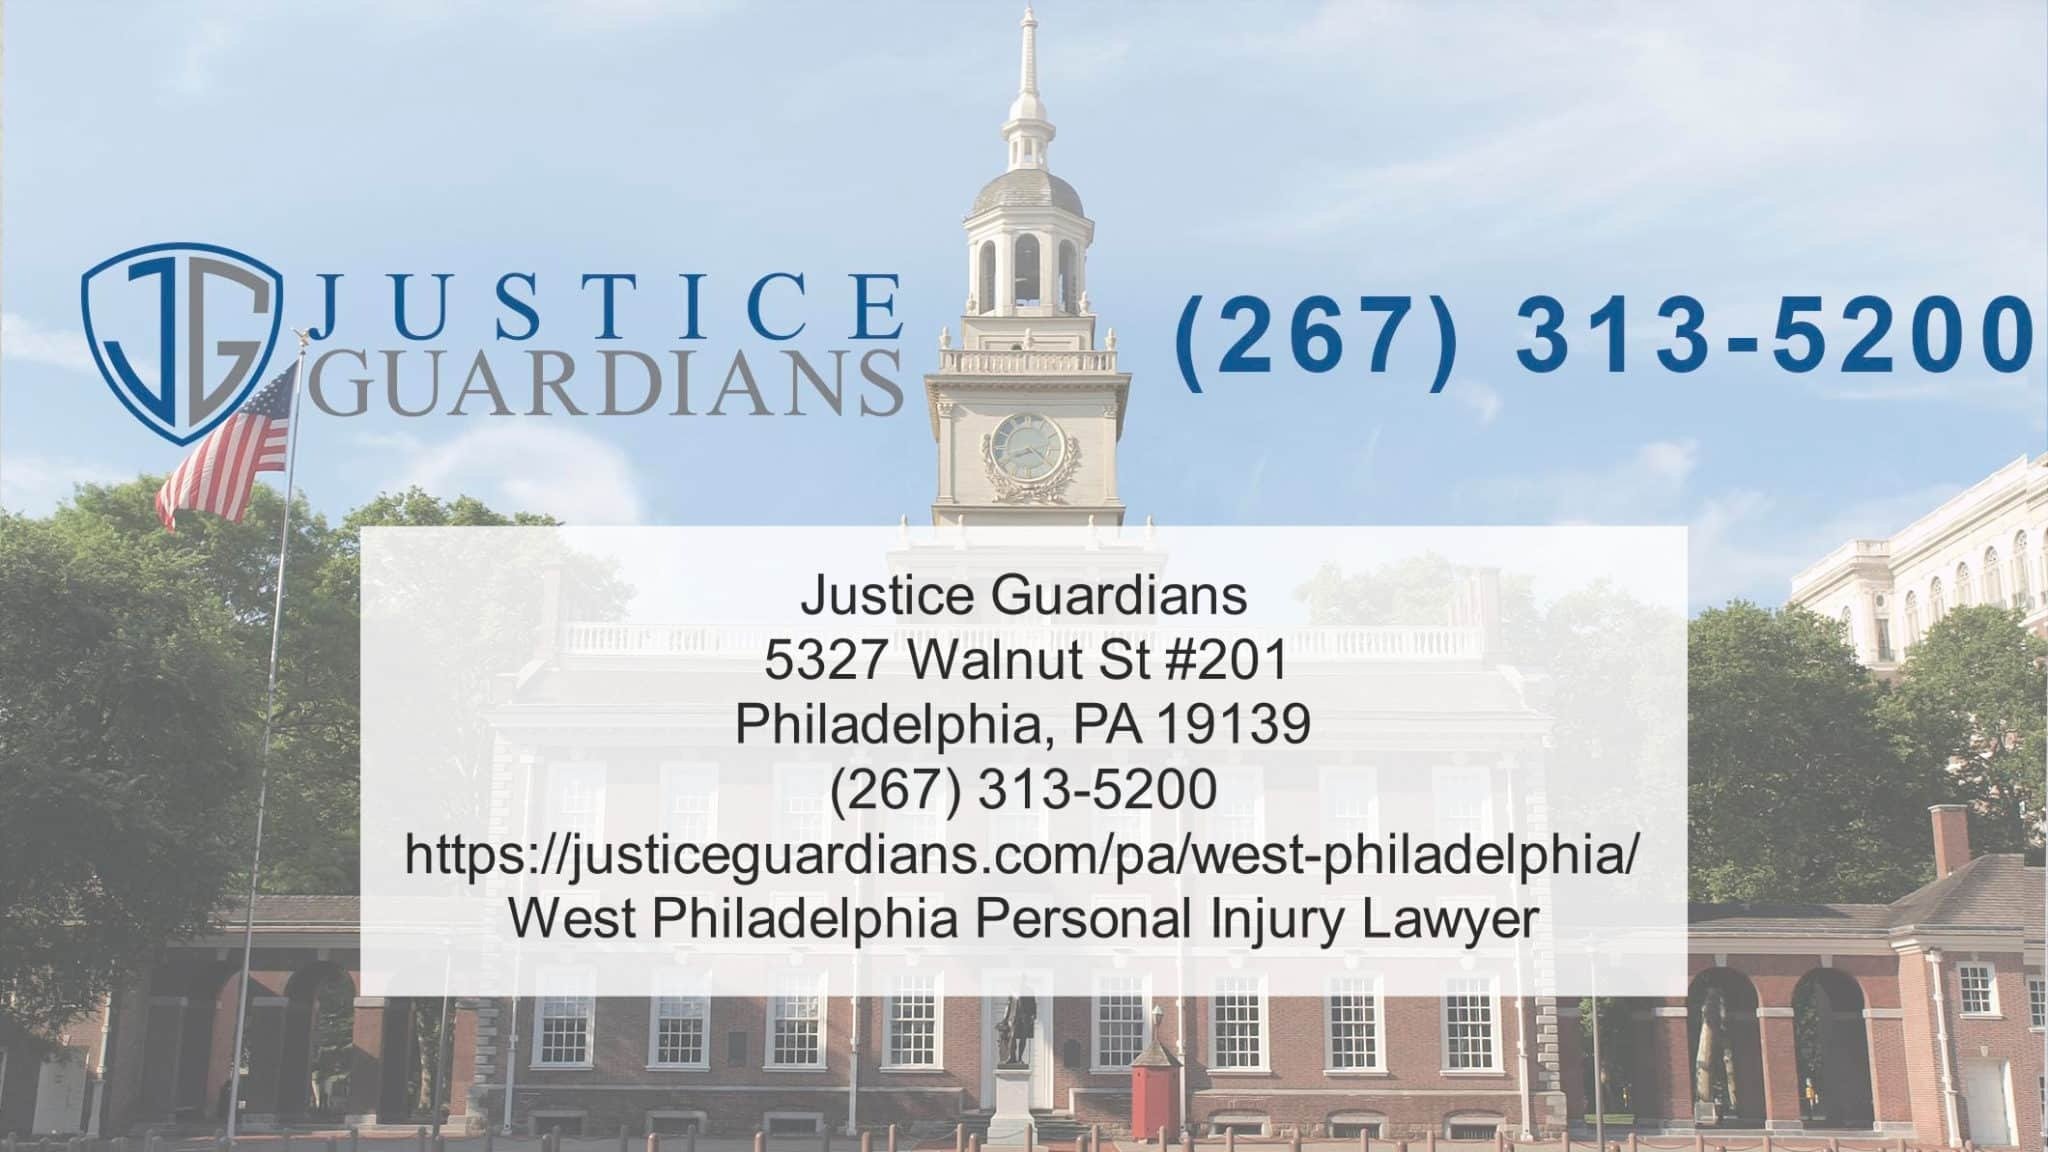 The Best Lawyer In West Philly Handles No-Win, No-Fee Birth Injury Cases